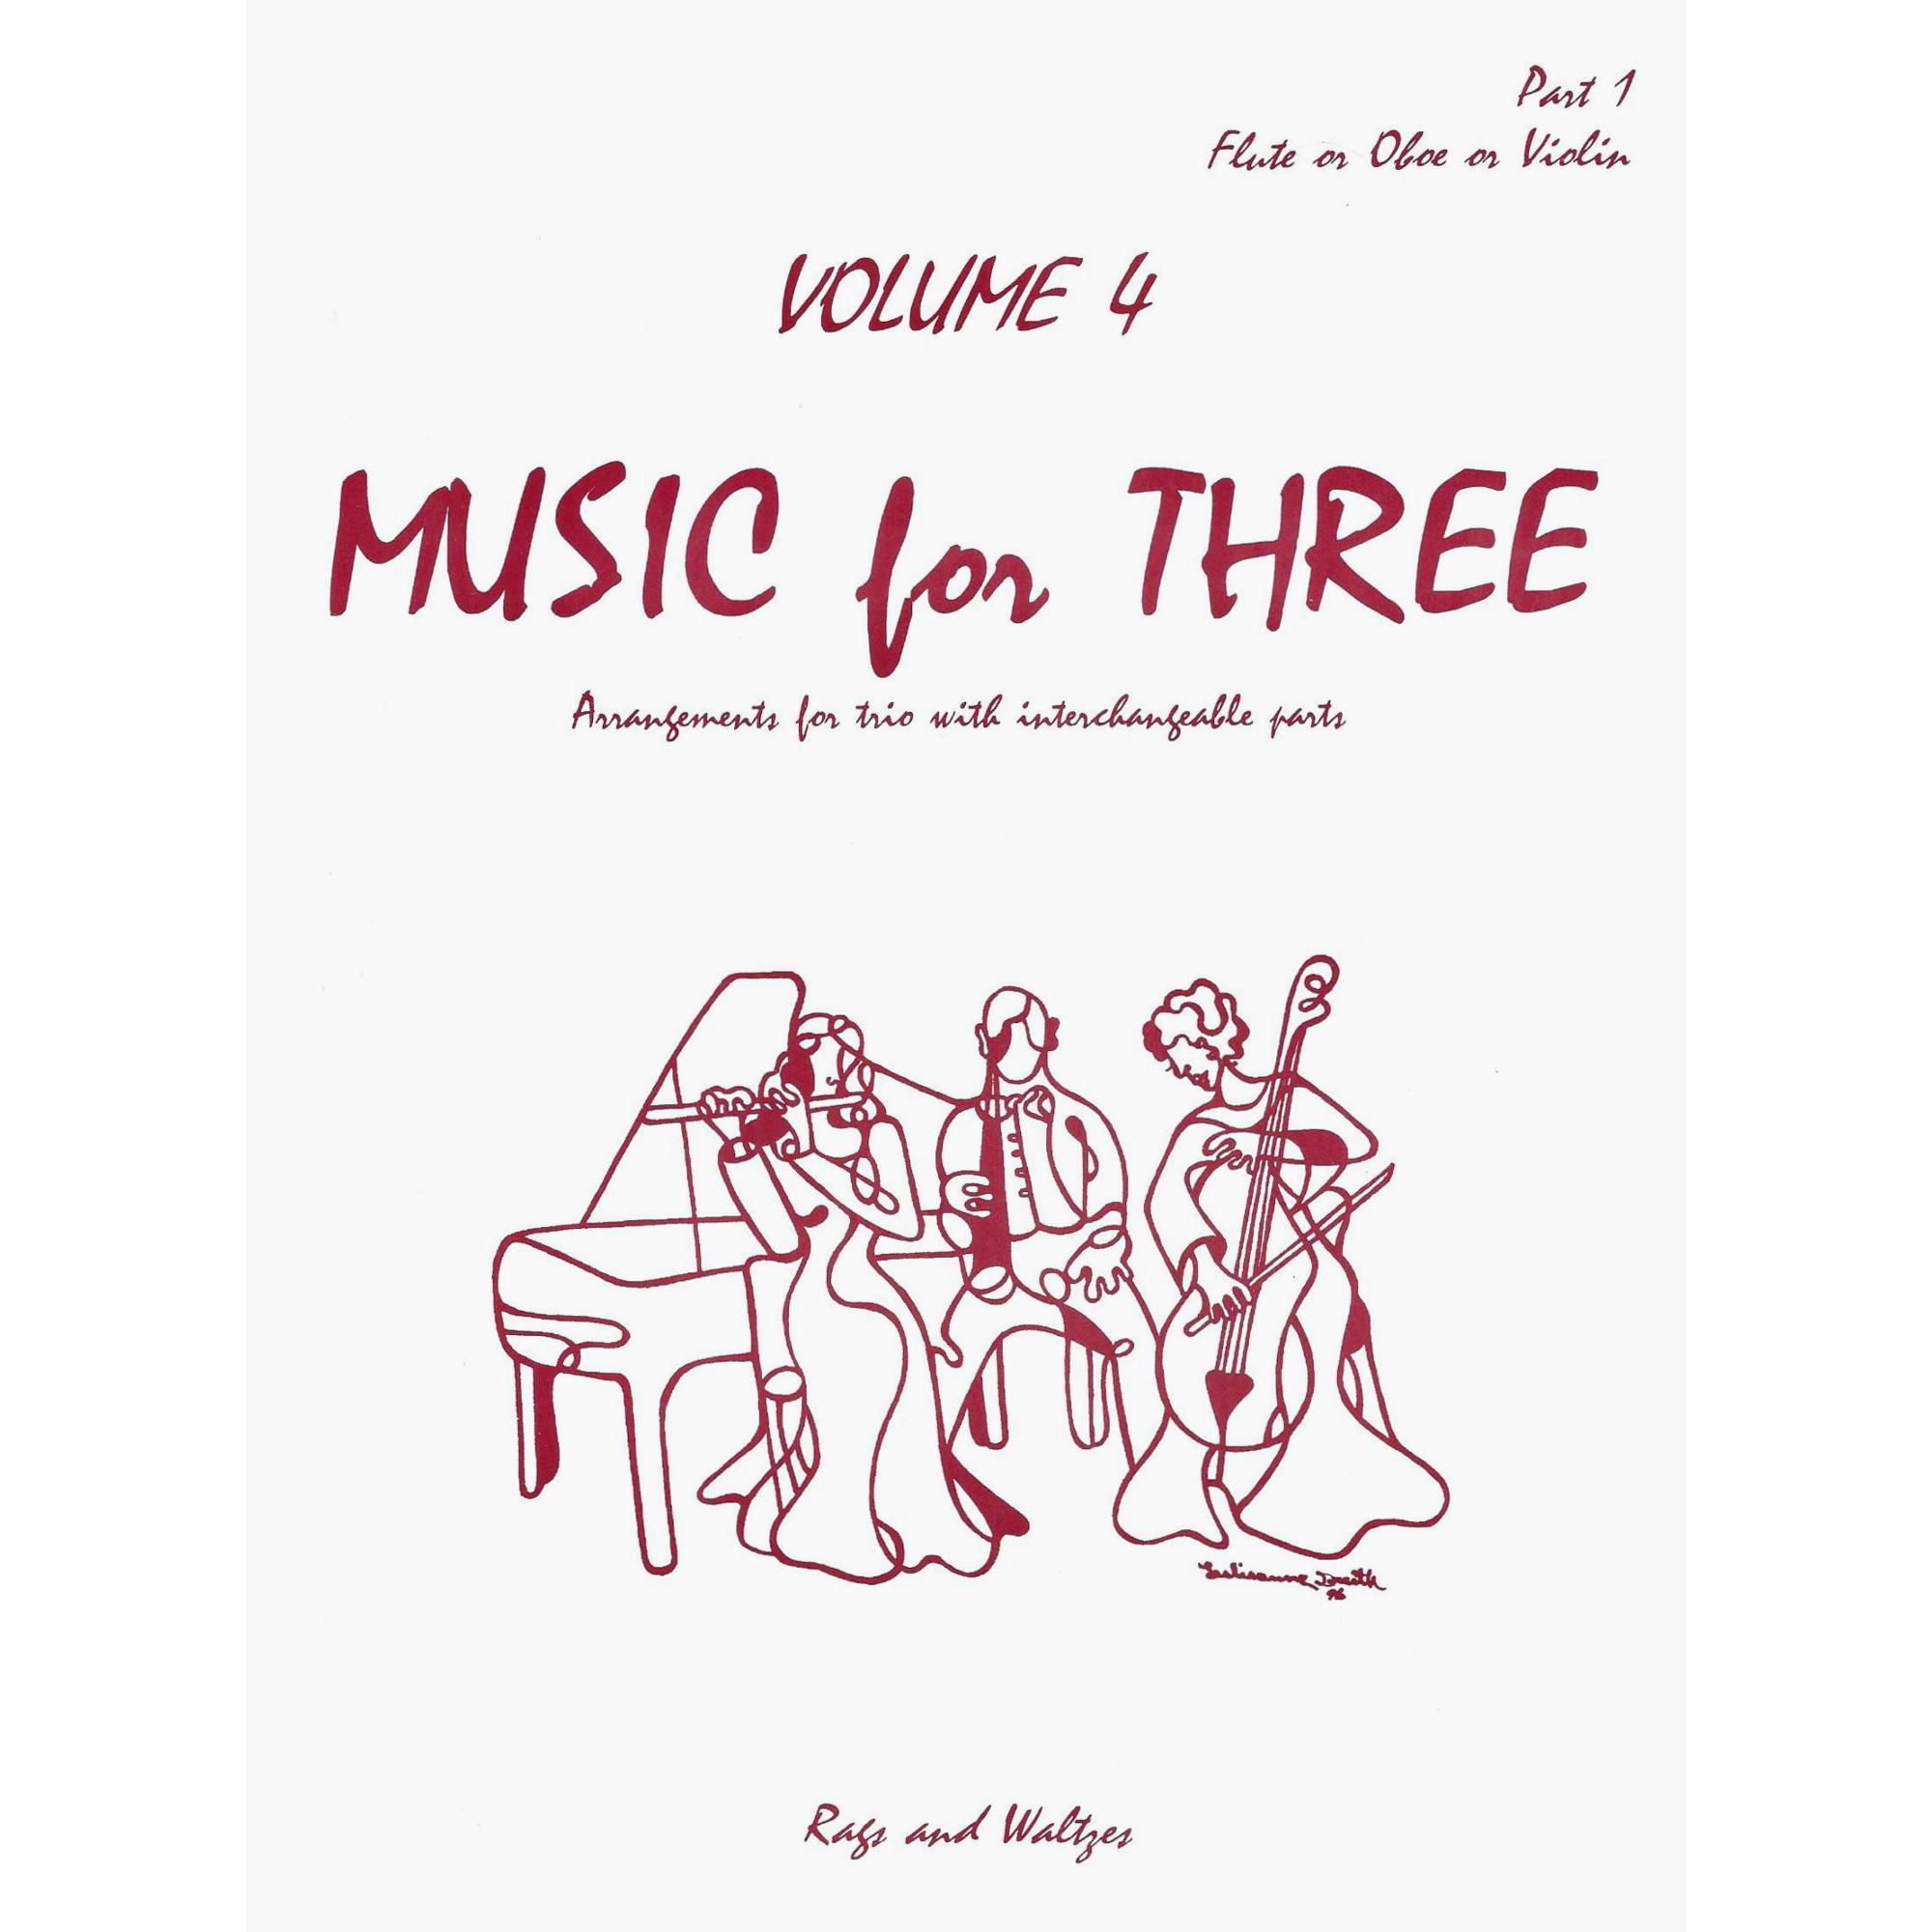 Music for Three, Volume 4: Rags and Waltzes